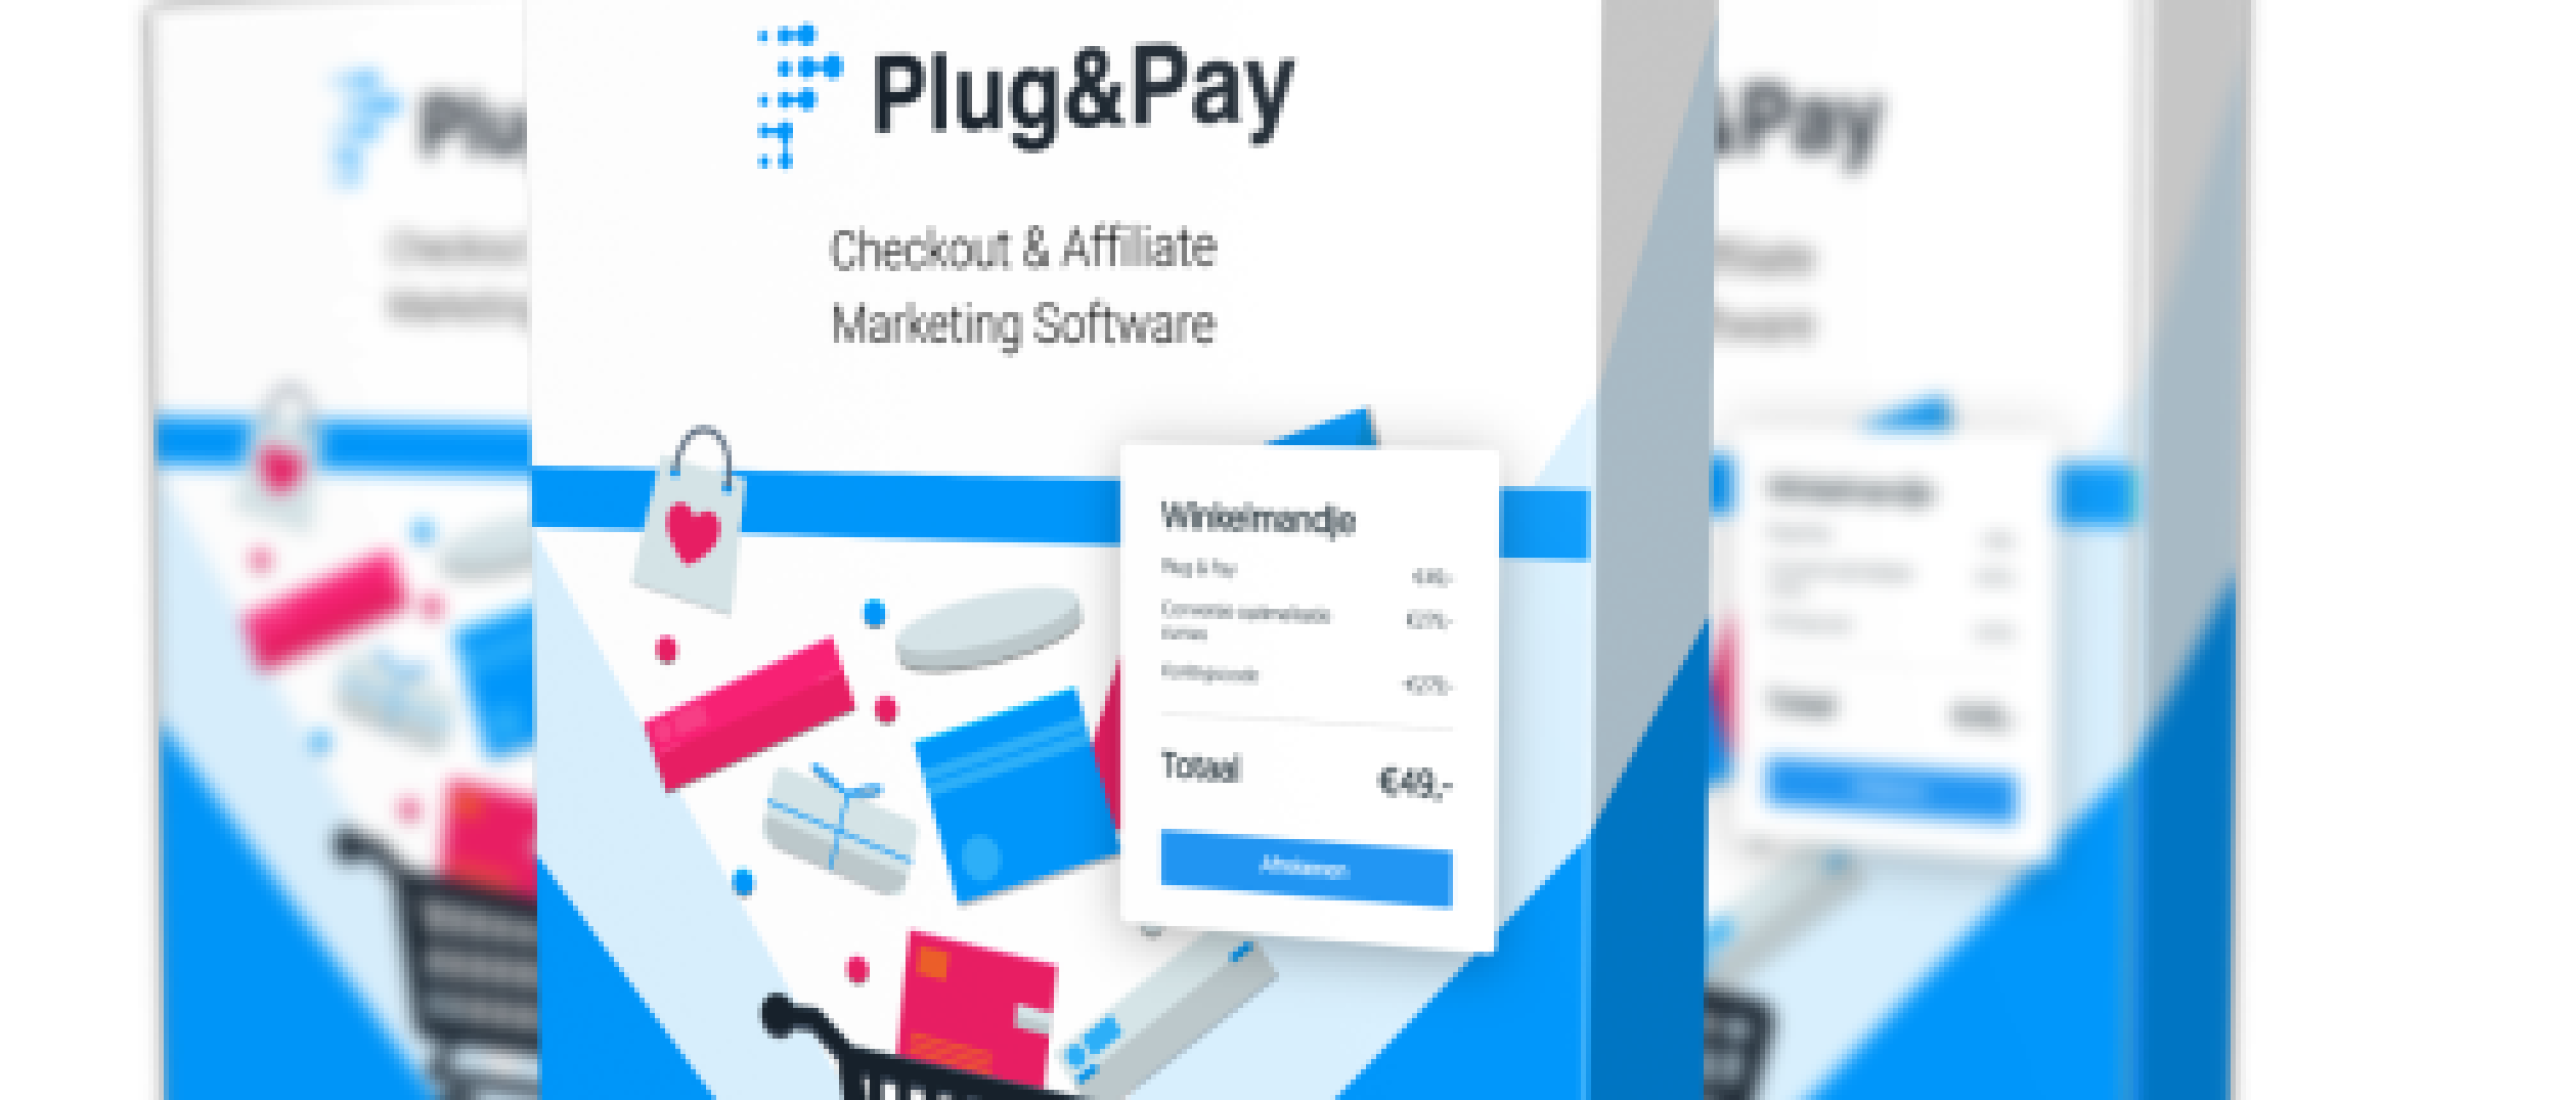 plug-and-pay-software-review-checkout-affiliate-software-500x360